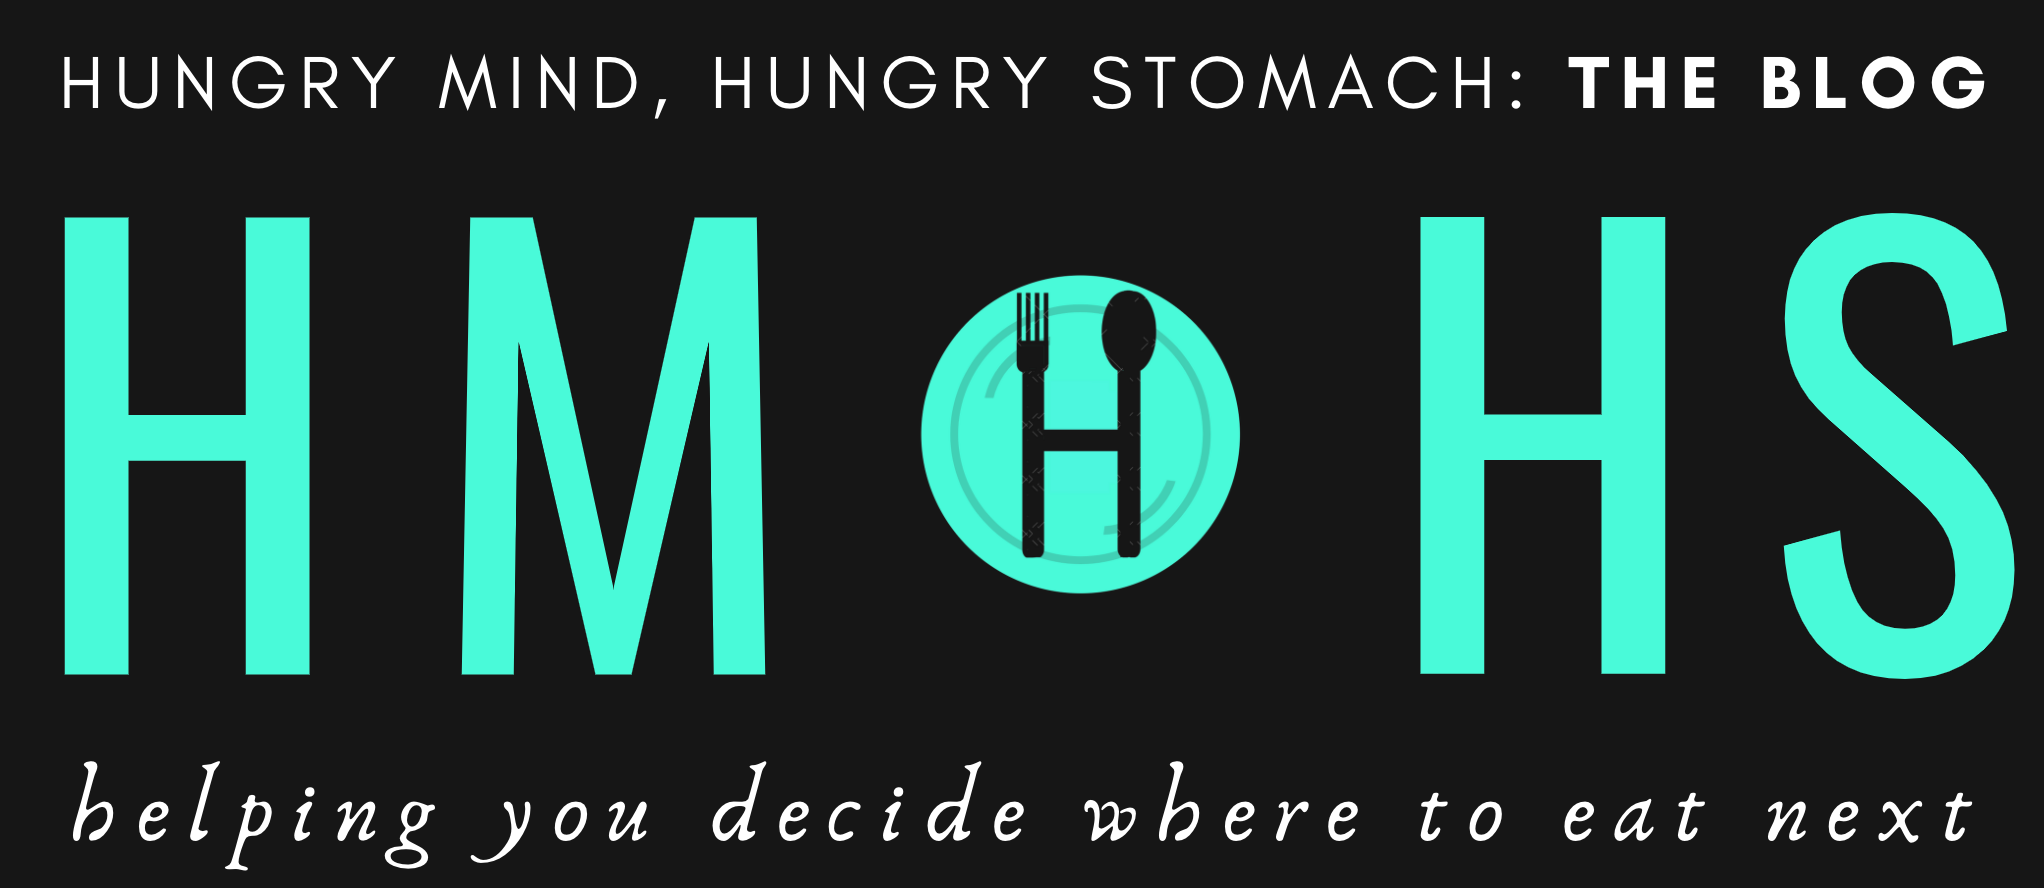 Hungry Mind, Hungry Stomach